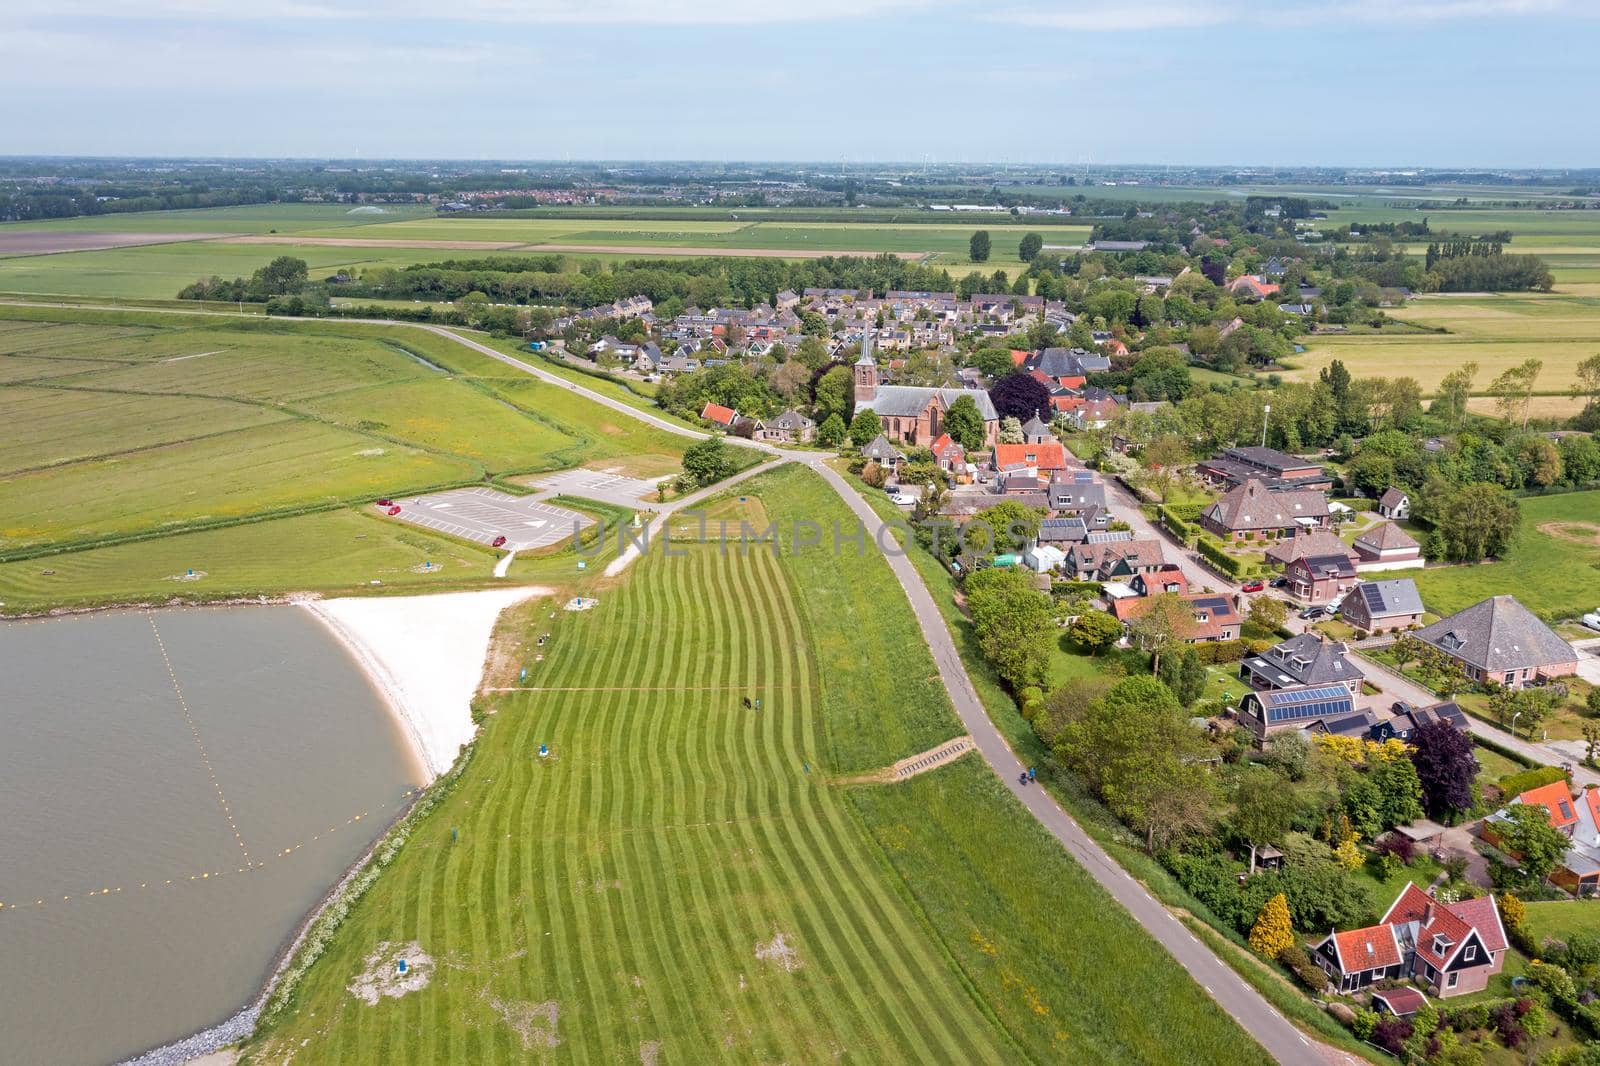 Aerial from the village Schellinkhout at the IJsselmeer in the Netherlands